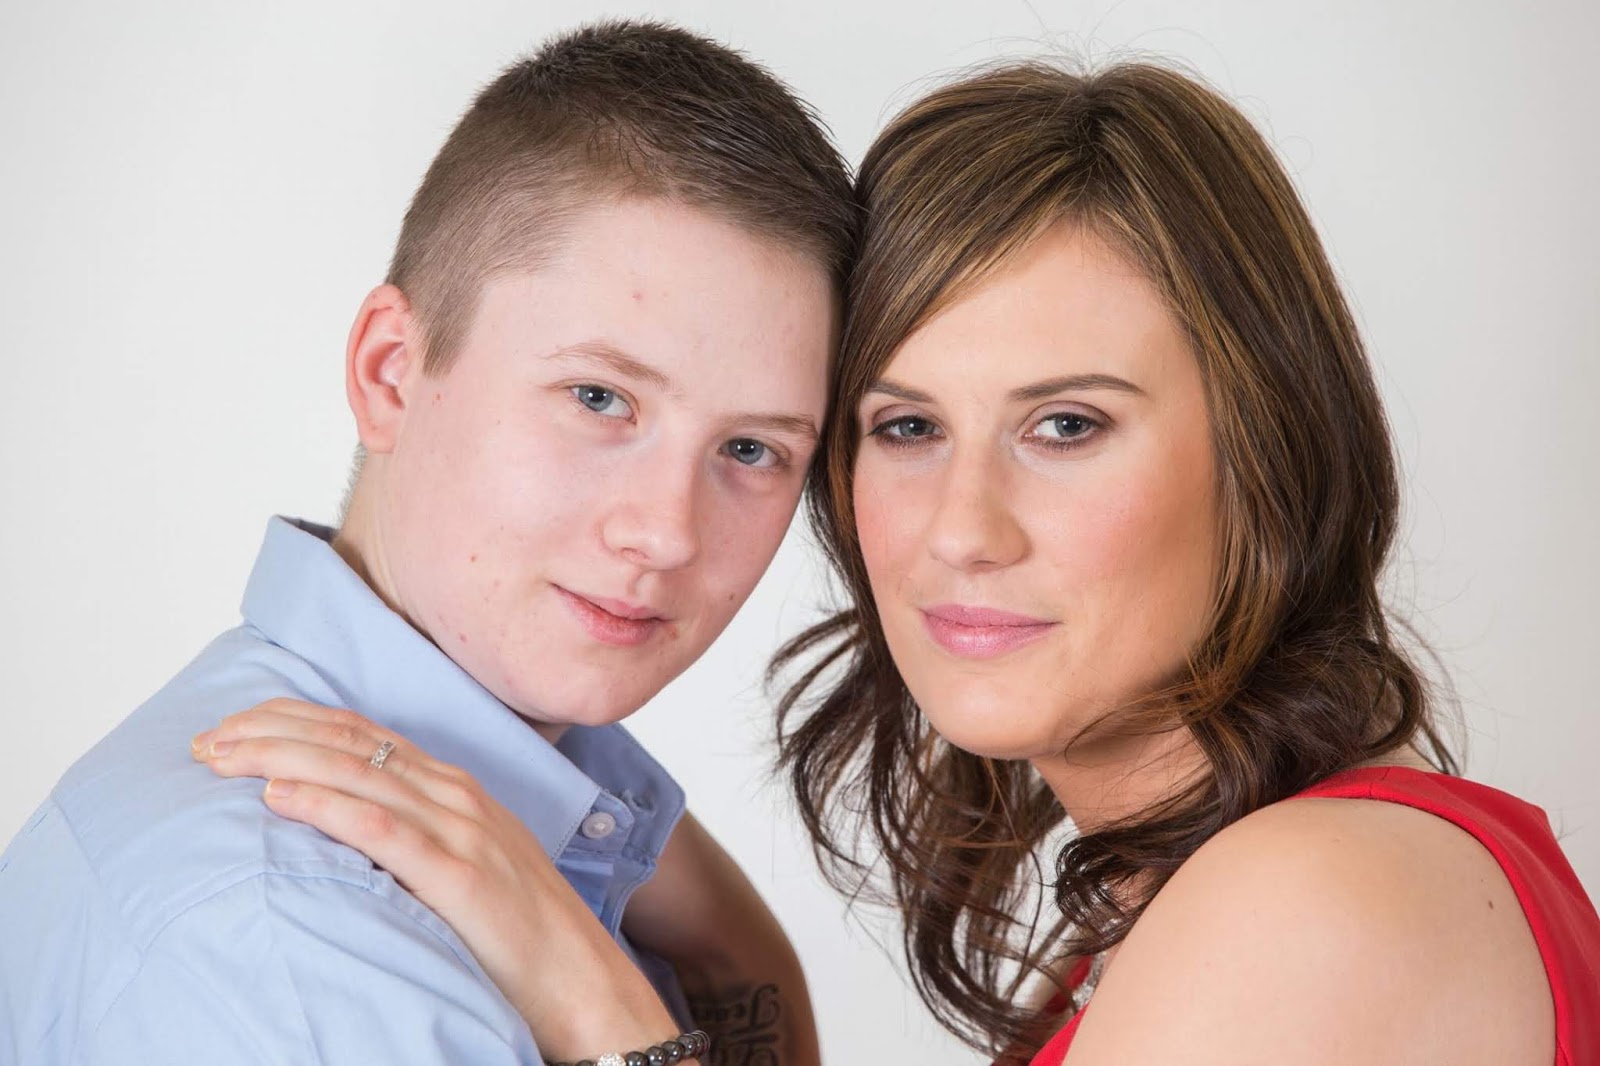 A New Wave Of Kids Is Coming Out As Transgender And Doctors Are Trying To Keep Up